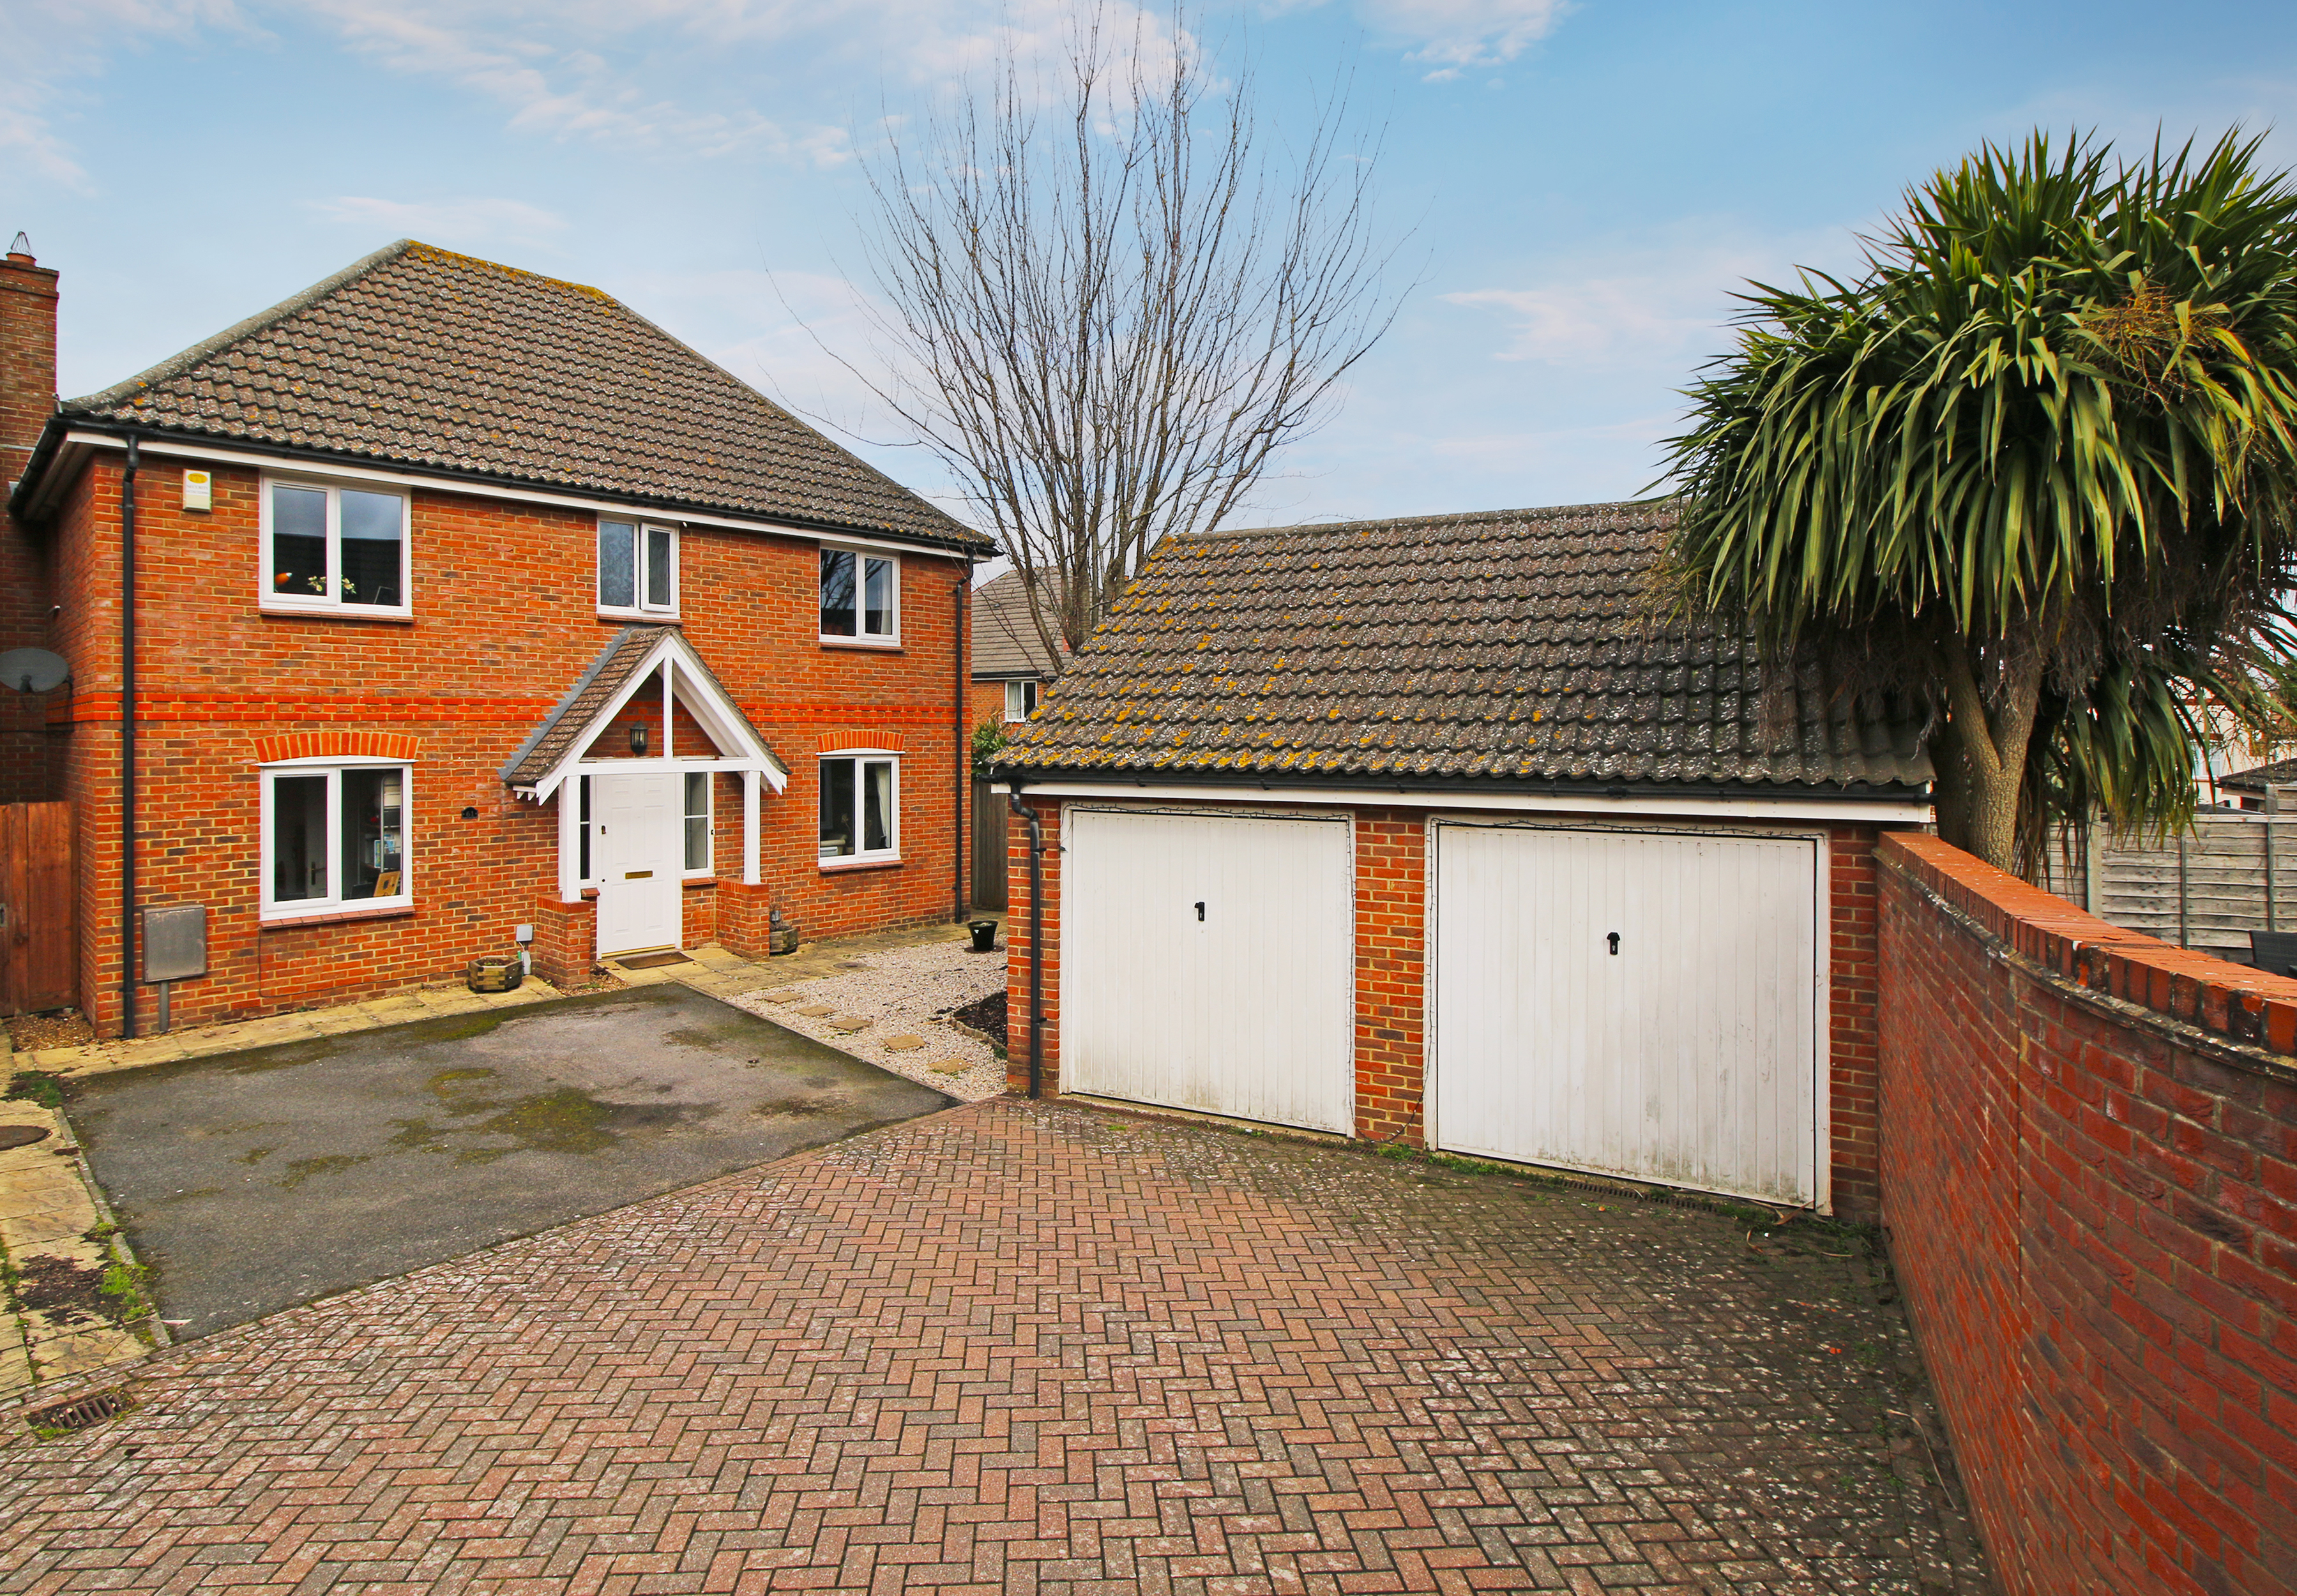 Sold In Your Area; Beaver Road, Maidstone